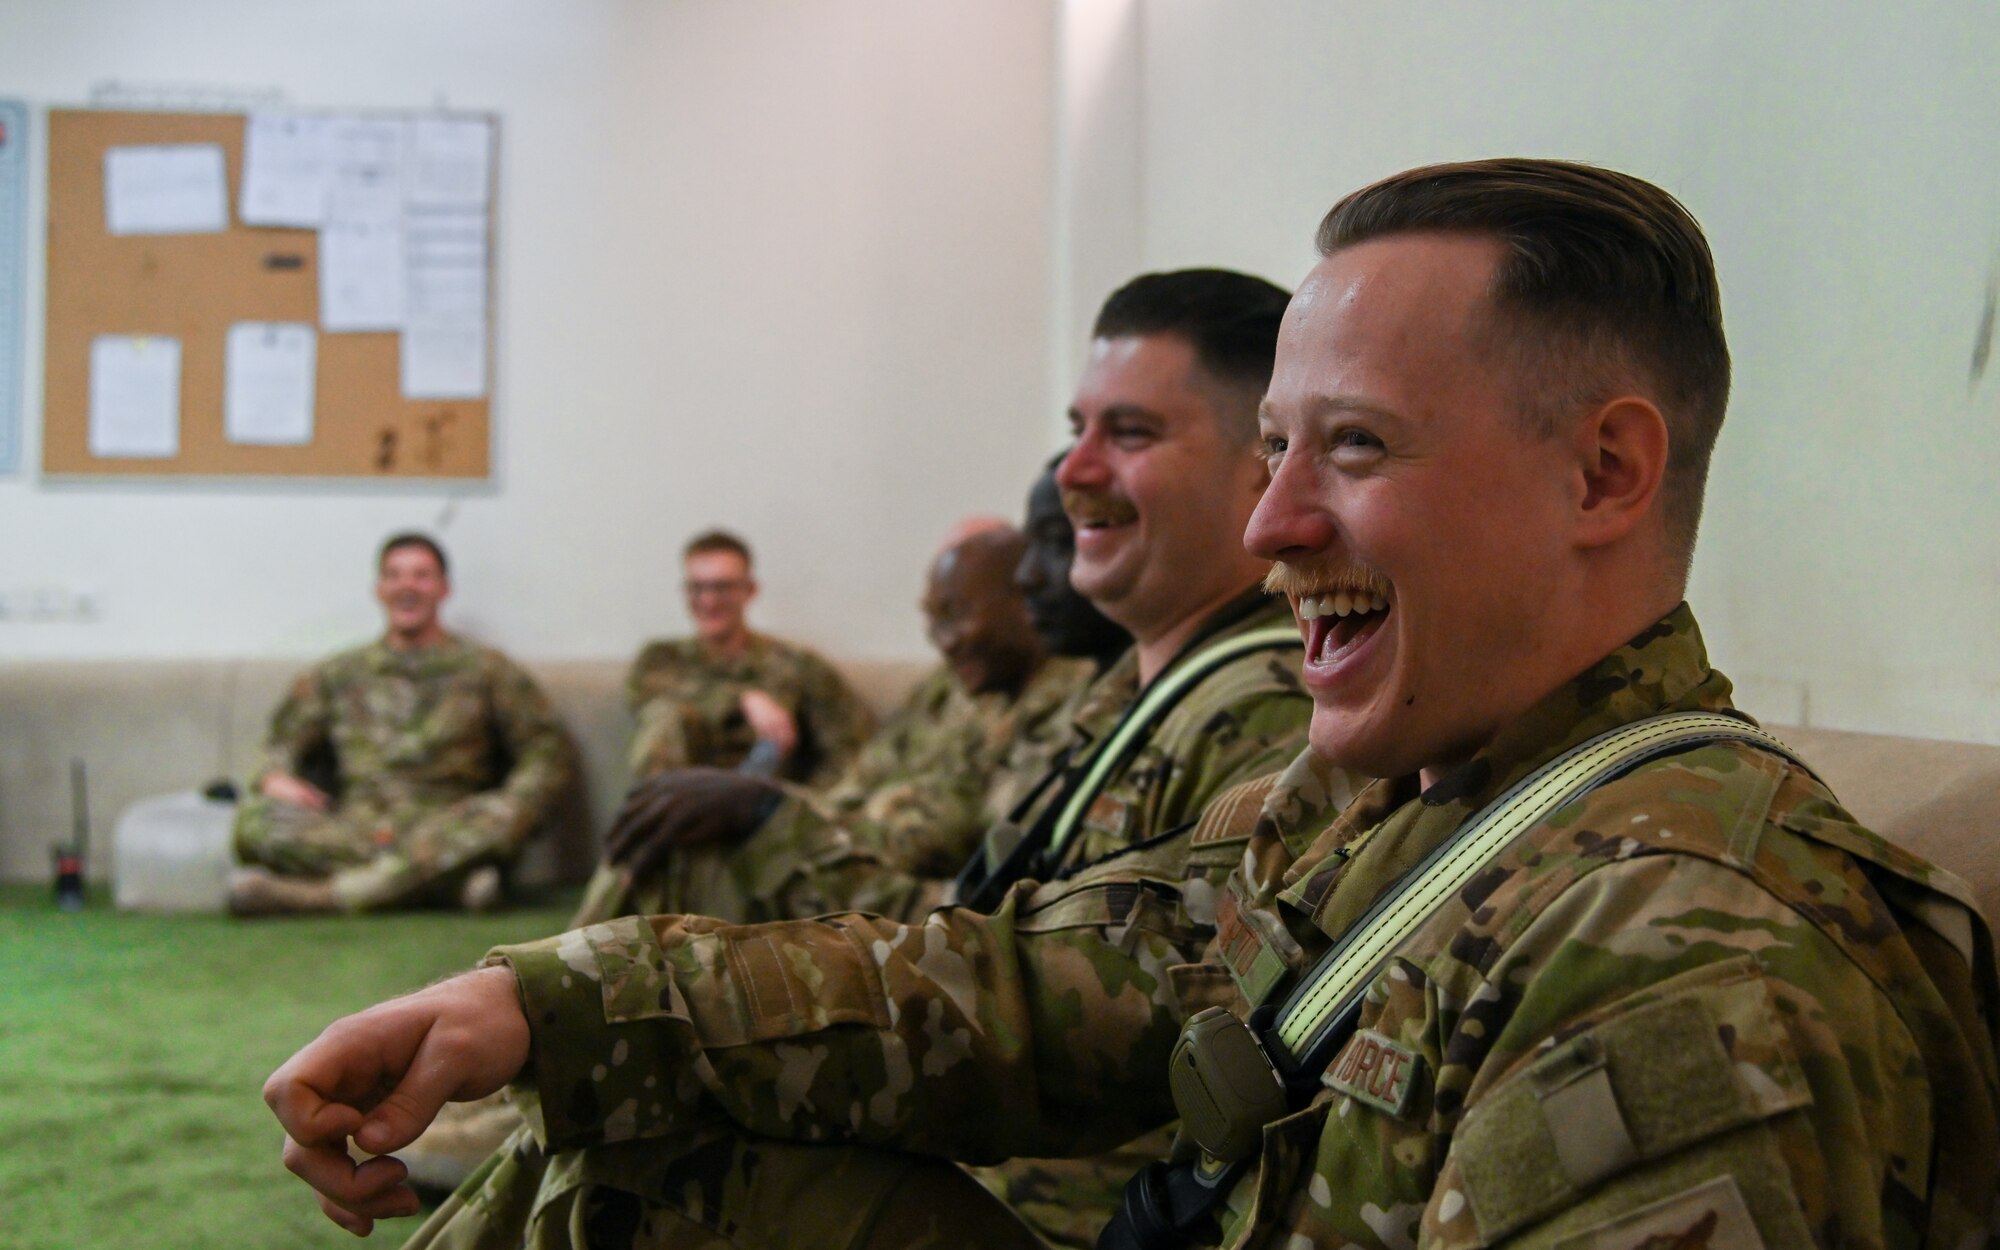 Airman 1st Class Tyler S. Loporto, 378th Expeditionary Civil Engineer Squadron fire fighter, laughs alongside members of his unit while sharing tea with service members from the Royal Saudi Air Force during an integrated training at Prince Sultan Air Base, Kingdom of Saudi Arabia, Nov. 24, 2021. The act of sharing tea is a staple of hospitality in Saudi culture and allows both teams the opportunity to bond in a more informal and welcoming environment. (U.S. Air Force photo by Staff Sgt. Christina Graves)